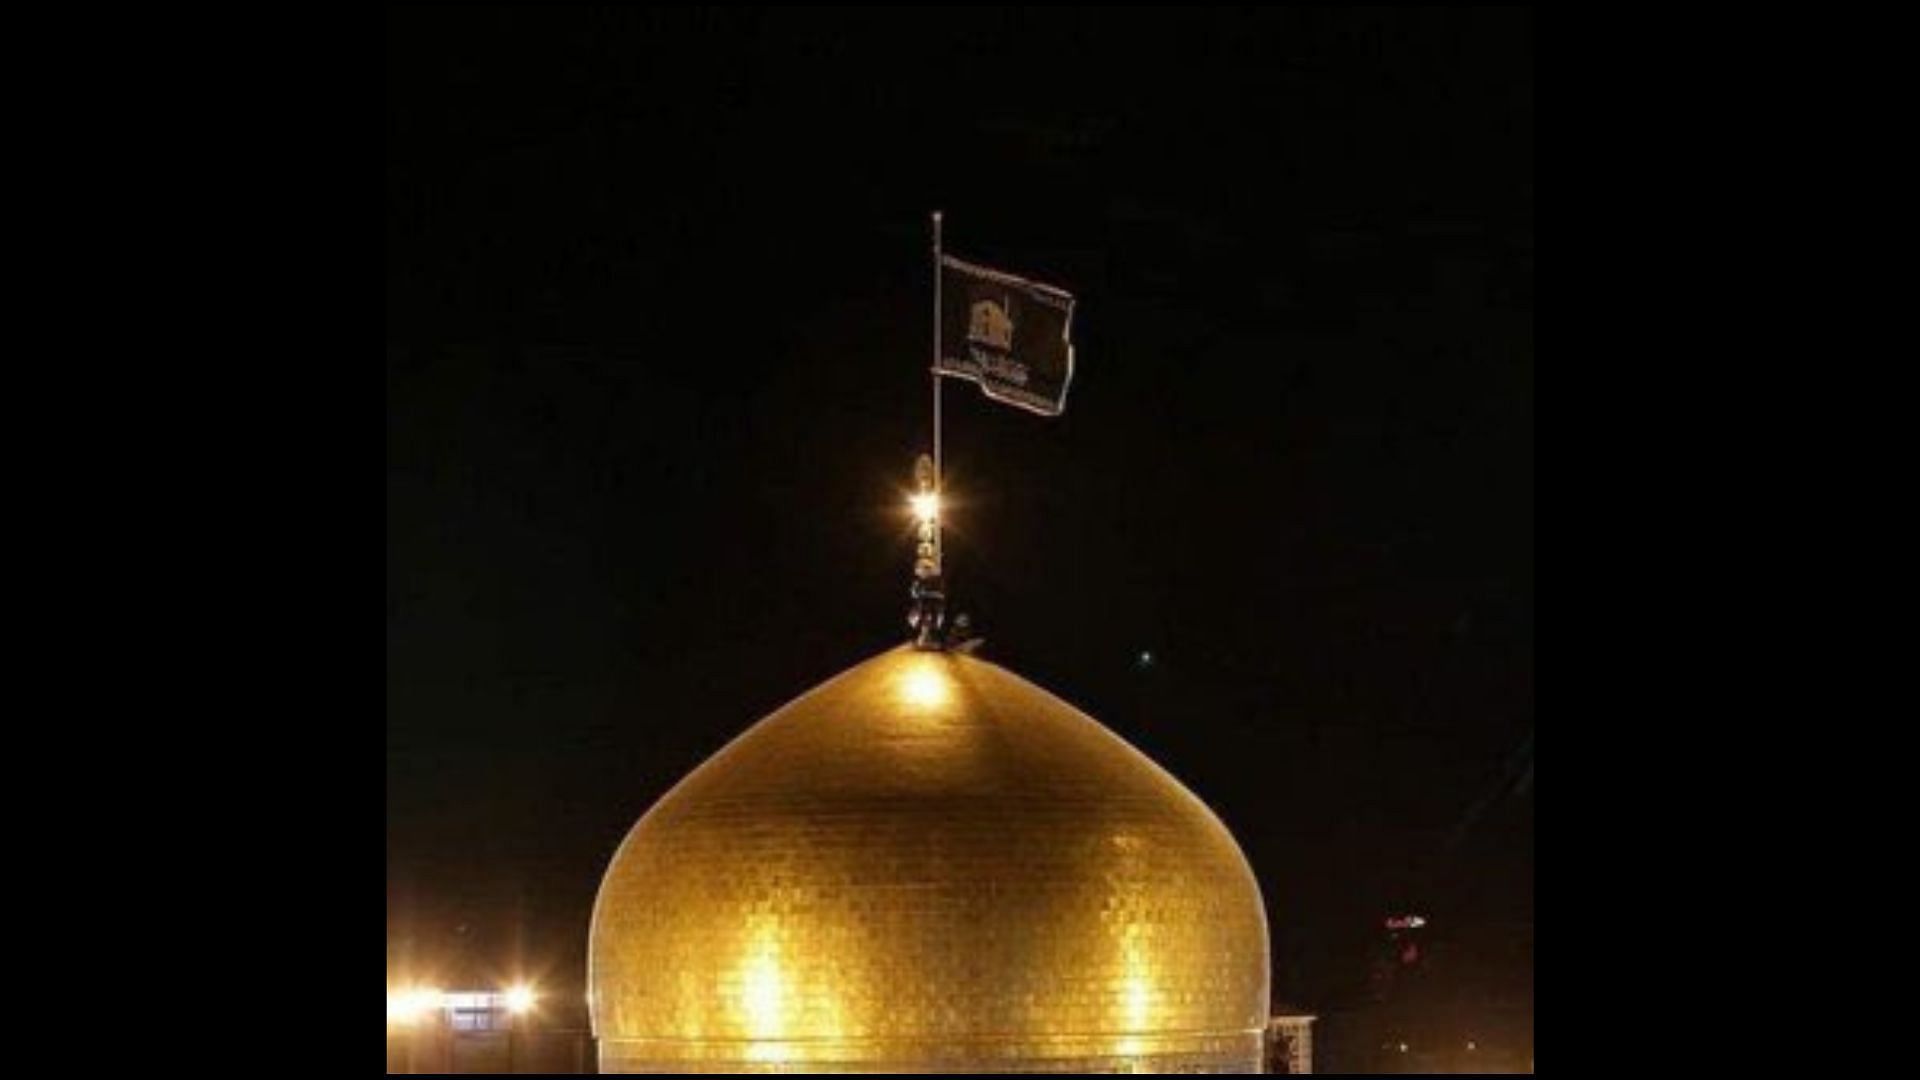   Is the Black flag raised in Iran a call for war? (Image via snip from X/@jacksonhinklle)